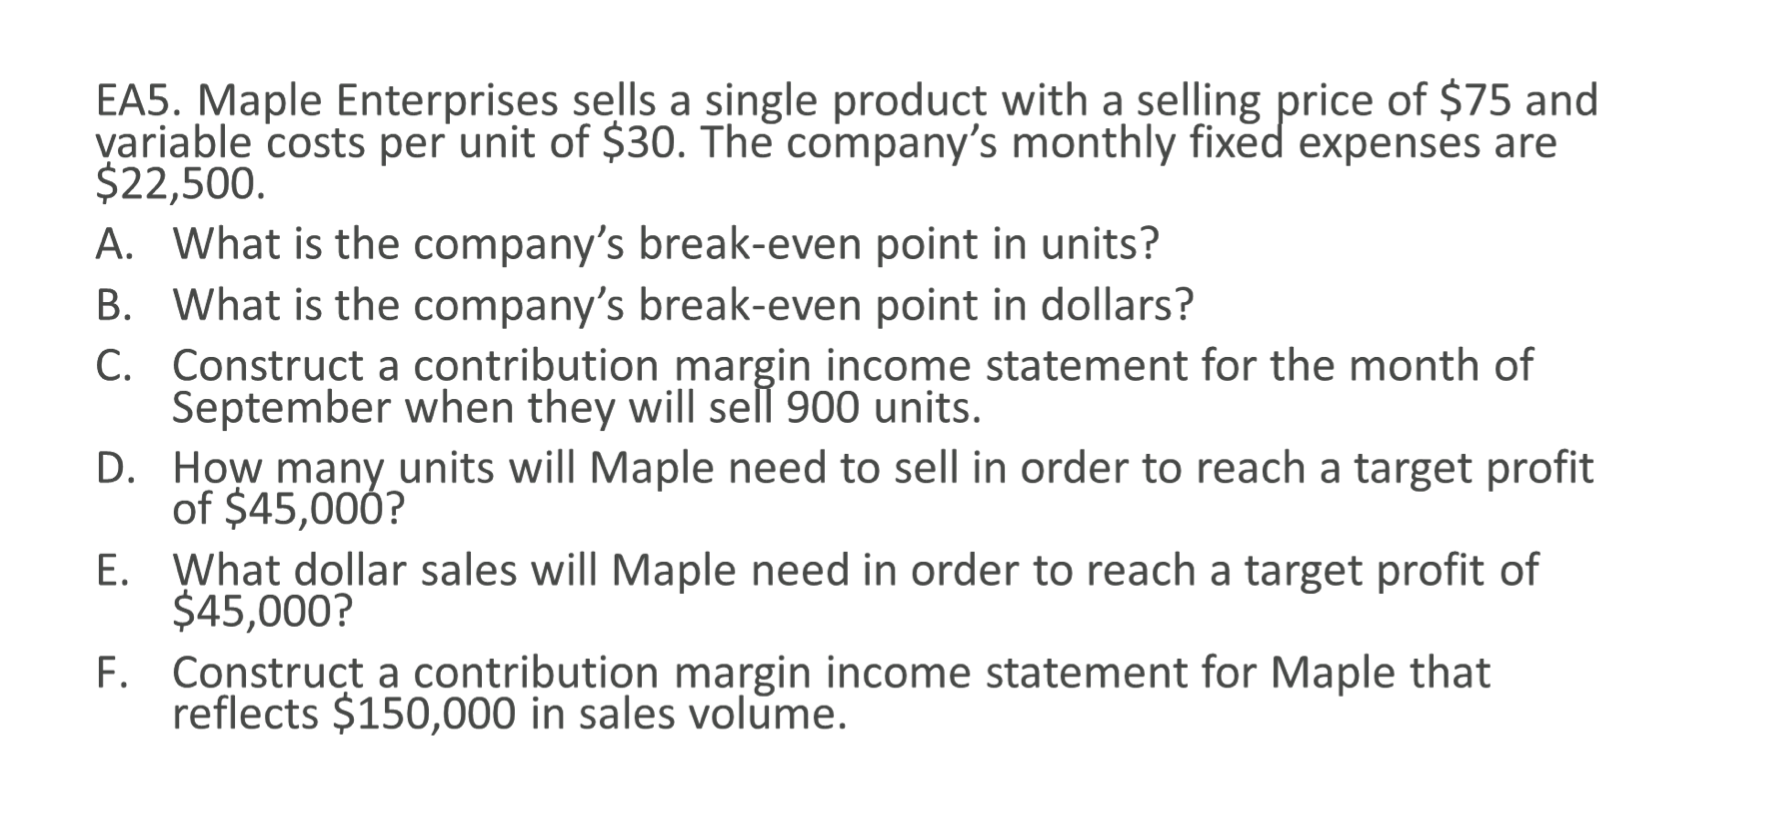 EA5. Maple Enterprises sells a single product with a selling price of $75 and
variable costs per unit of $30. The company's monthly fixed expenses are
$22,500.
A. What is the company's break-even point in units?
B. What is the company's break-even point in dollars?
C. Construct a contribution margin income statement for the month of
September when they will sell 900 units.
D. How many units will Maple need to sell in order to reach a target profit
of $45,000?
E. What dollar sales will Maple need in order to reach a target profit of
$45,000?
F. Construct a contribution margin income statement for Maple that
reflects $150,000 in sales volume.
